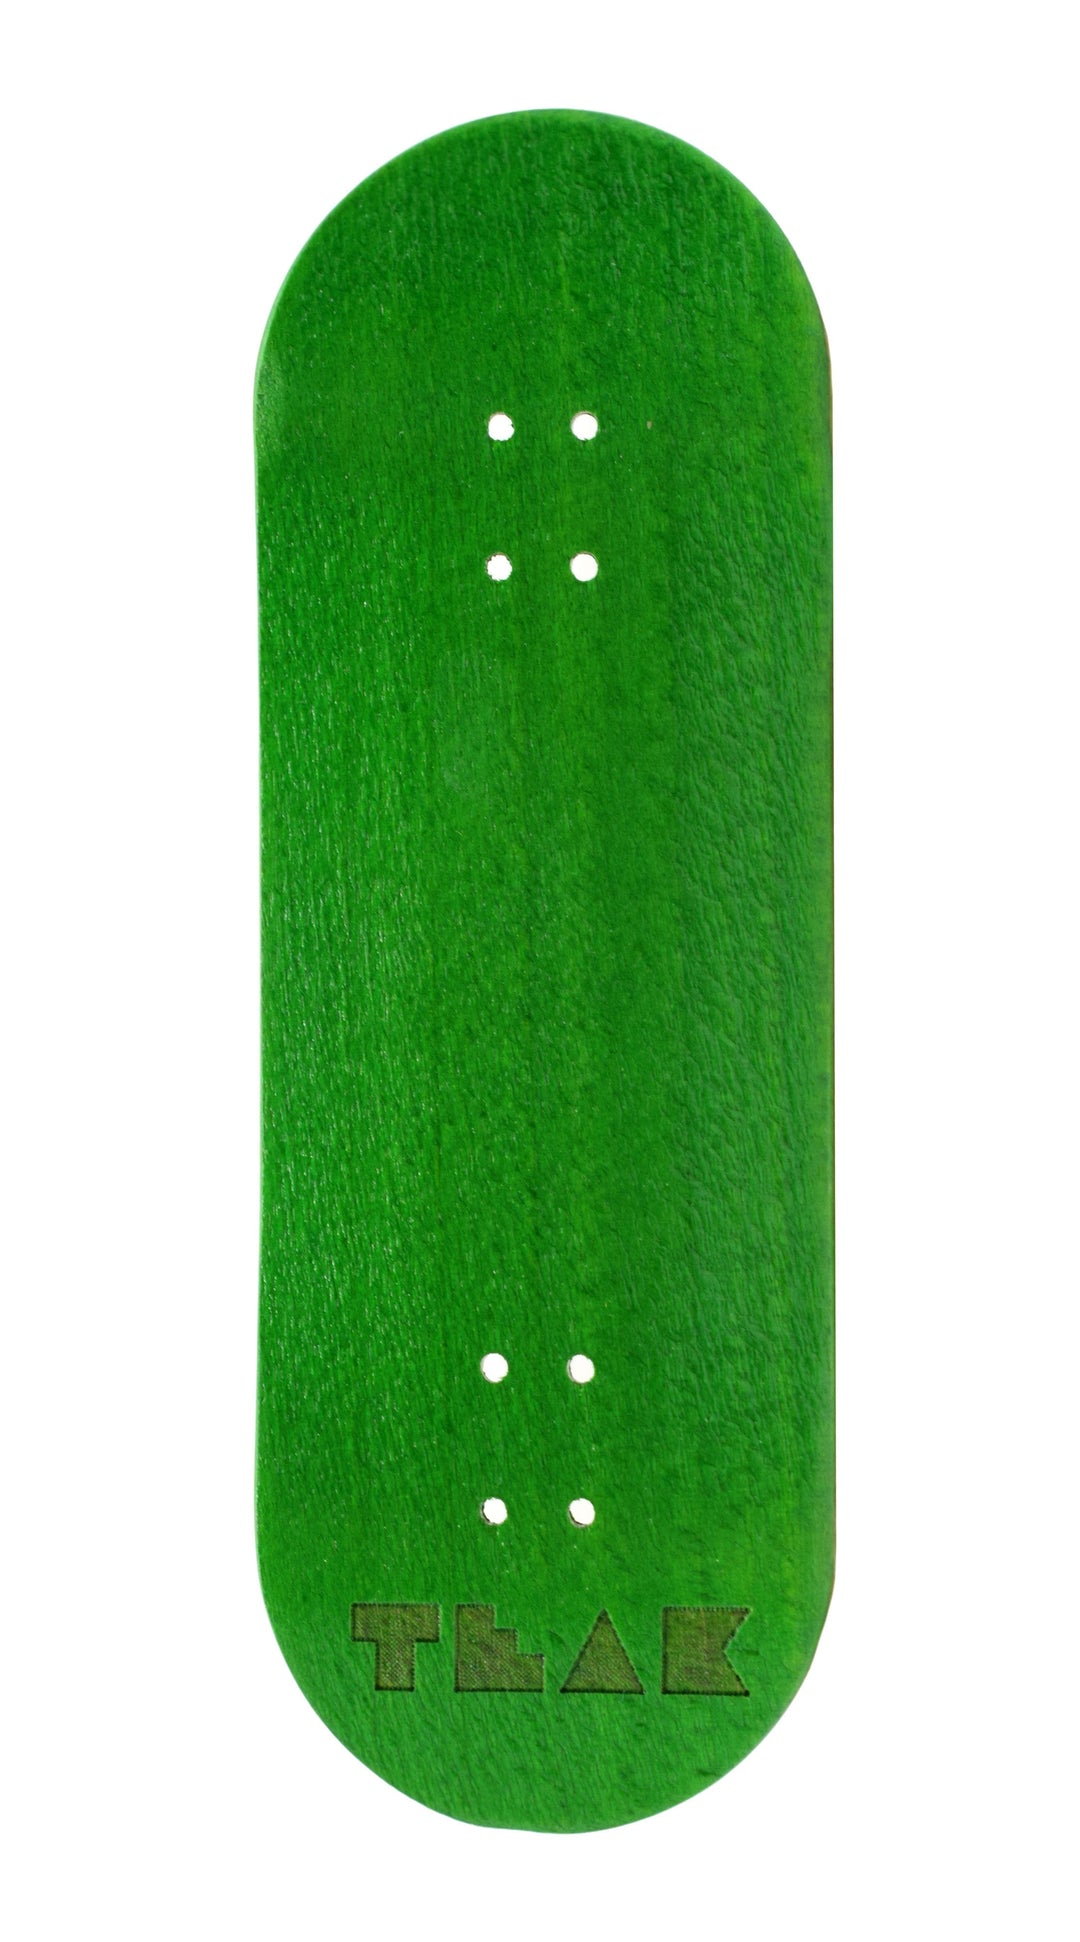 Teak Tuning PROlific Wooden 5 Ply Fingerboard Deck 32x95mm - Ghillie Green - with Color Matching Mid Ply